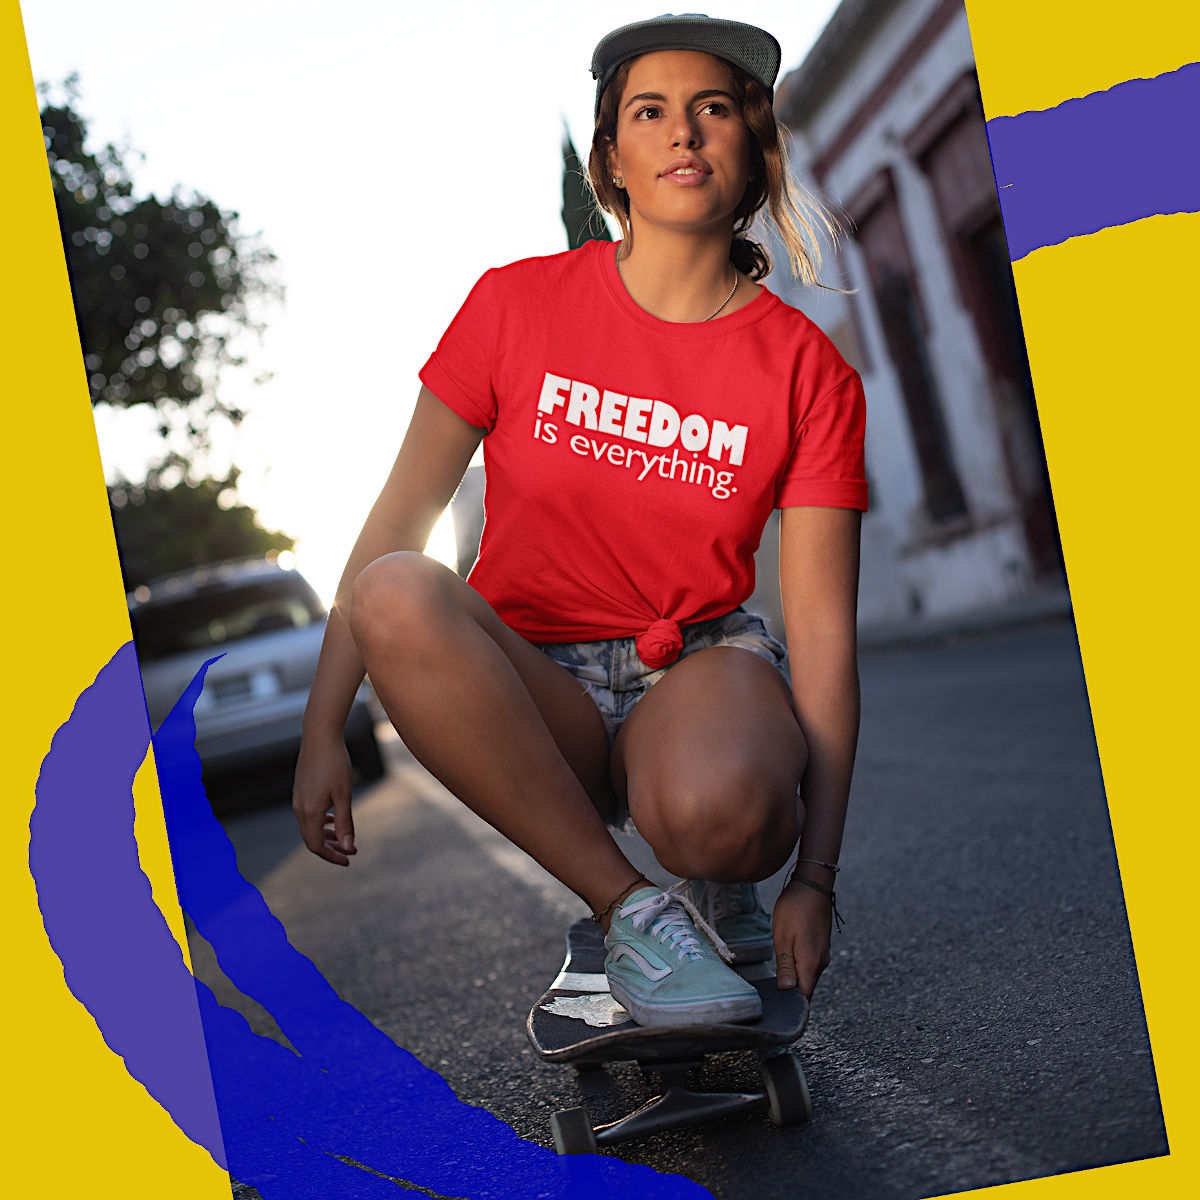 image_freedom_everything_skater_woman_white_red_27079_x1200